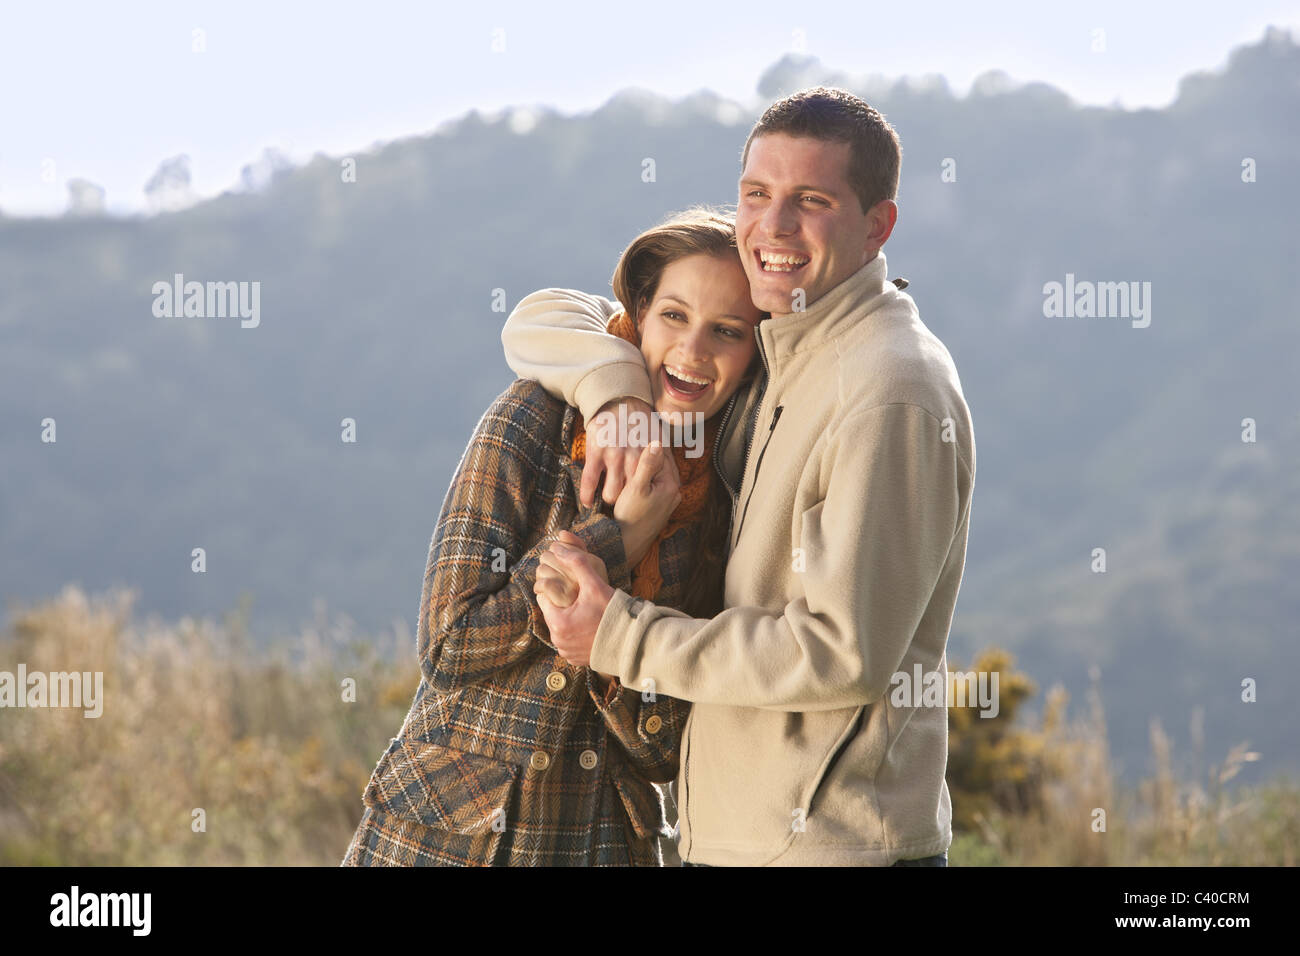 Young couple embracing in rural scene Banque D'Images